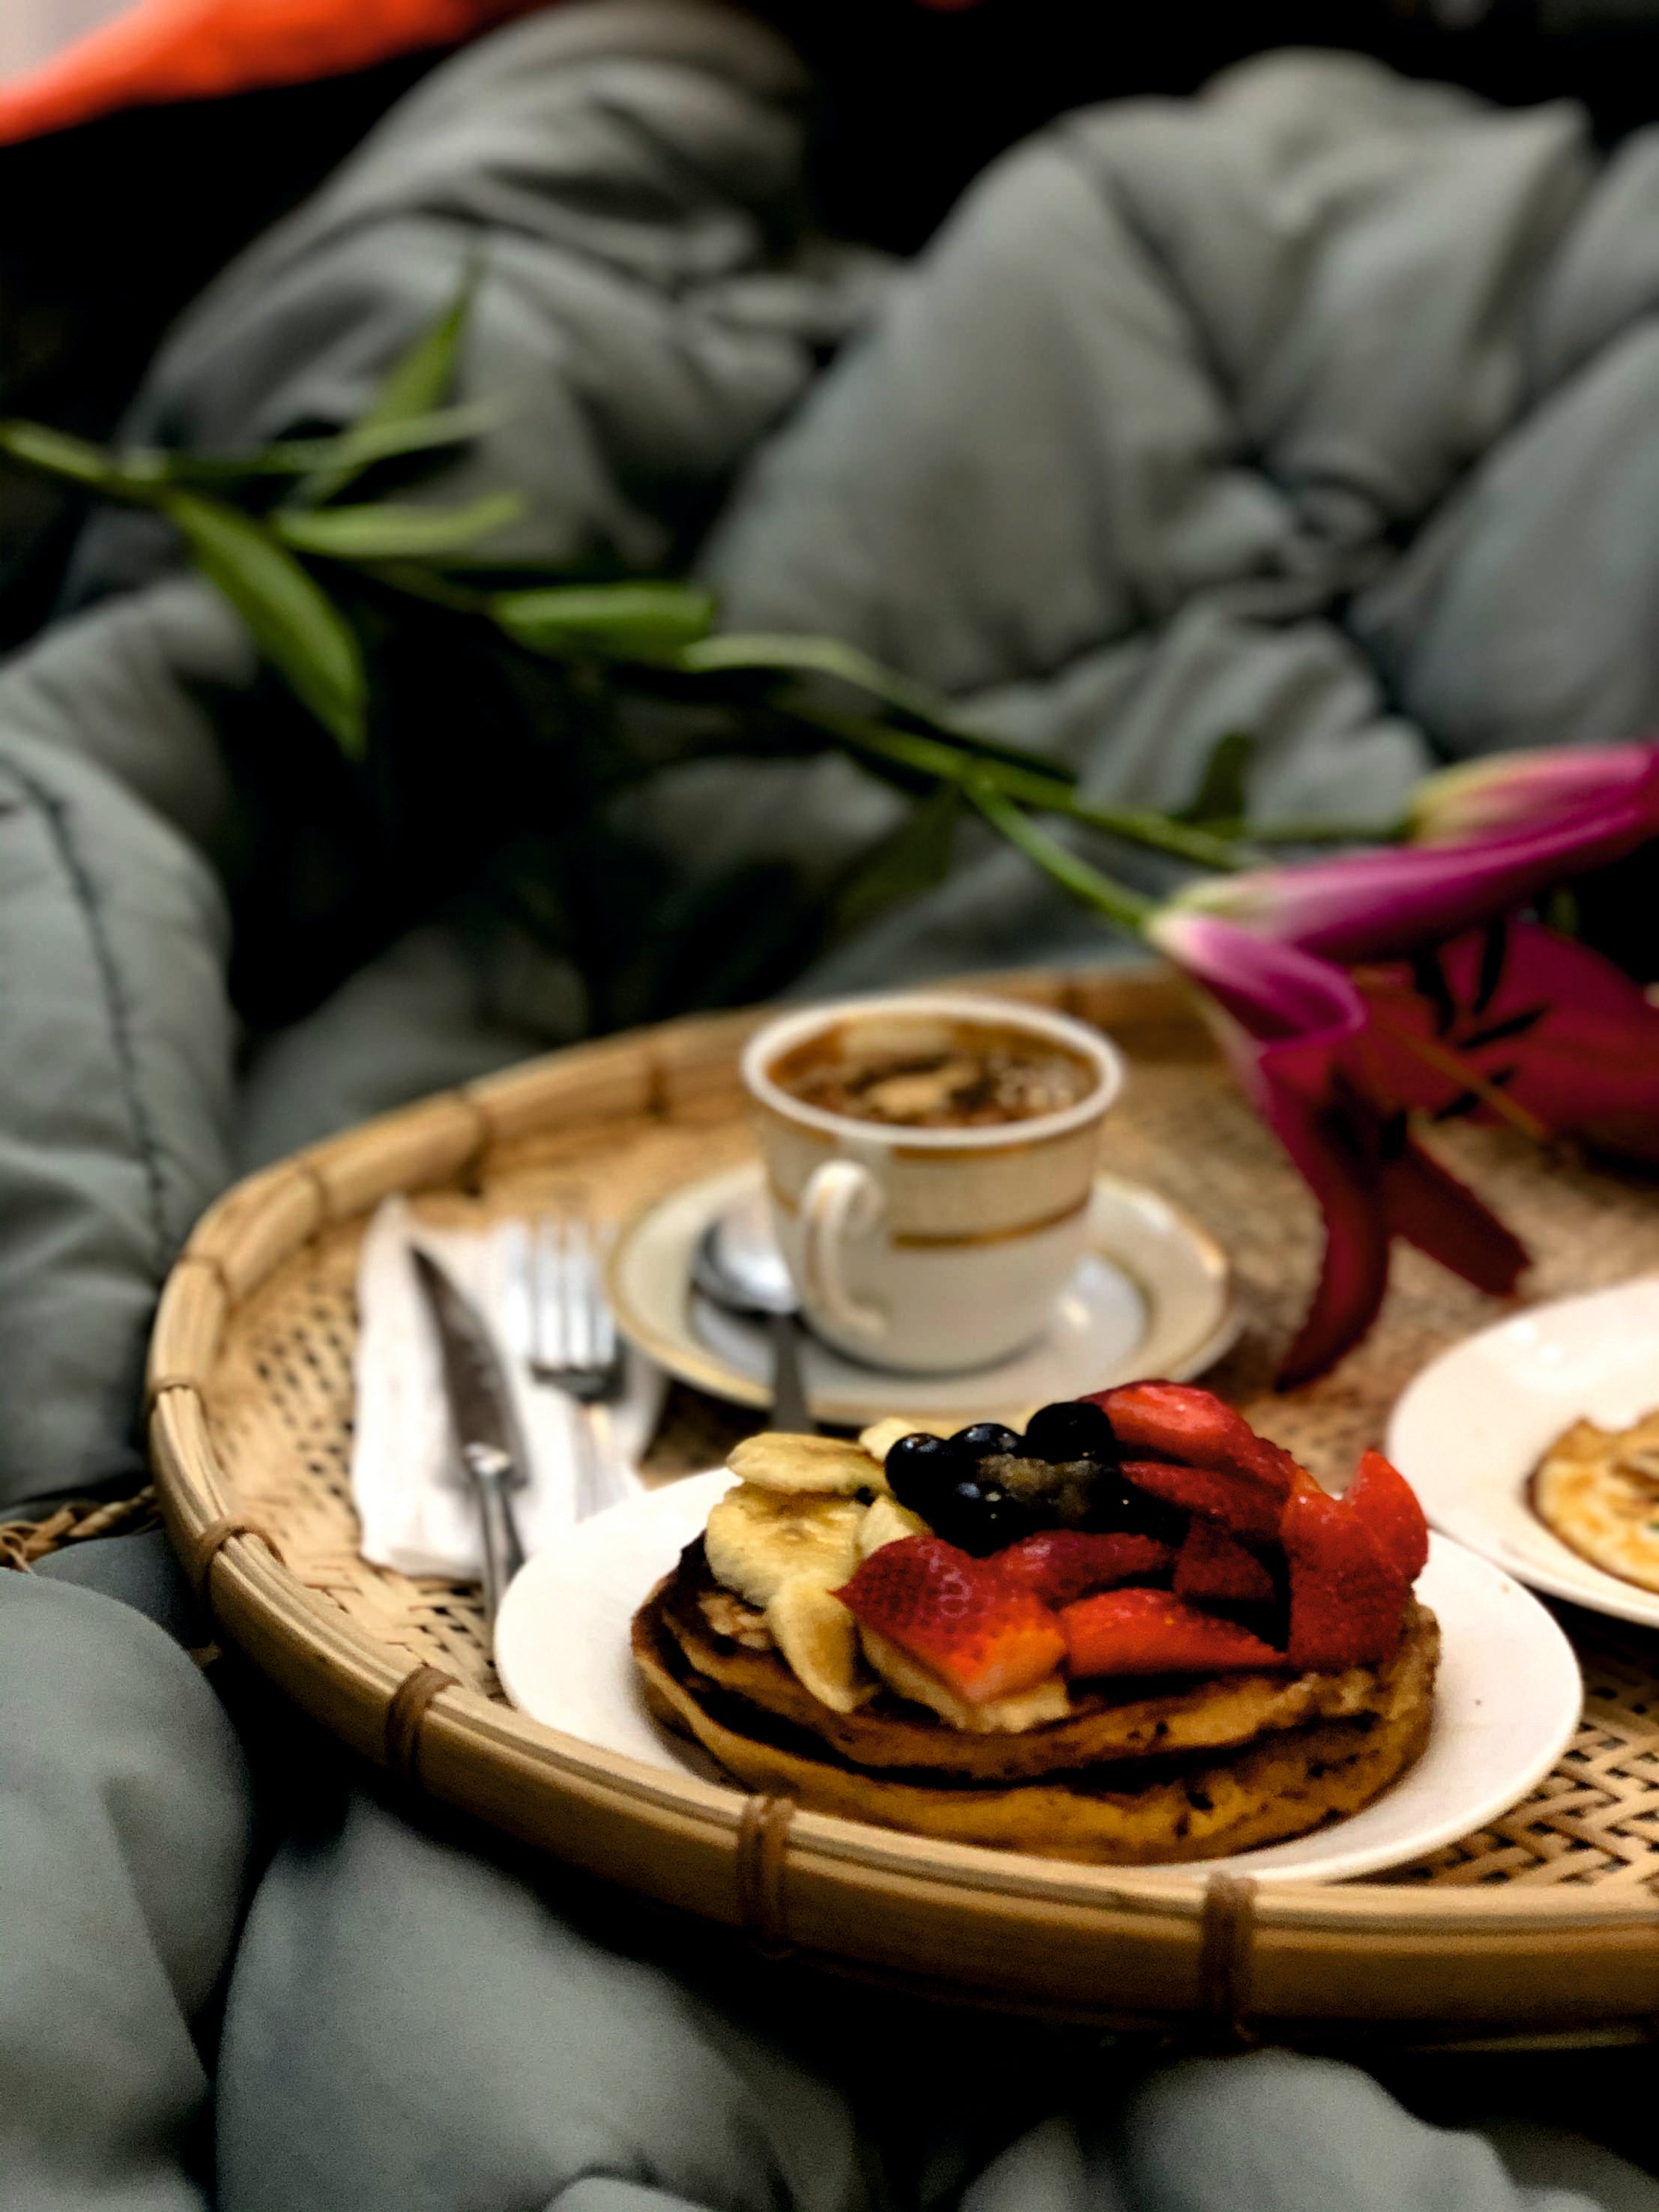 Breakfast in bed tray/ Wall tray - handcrafted in bamboo